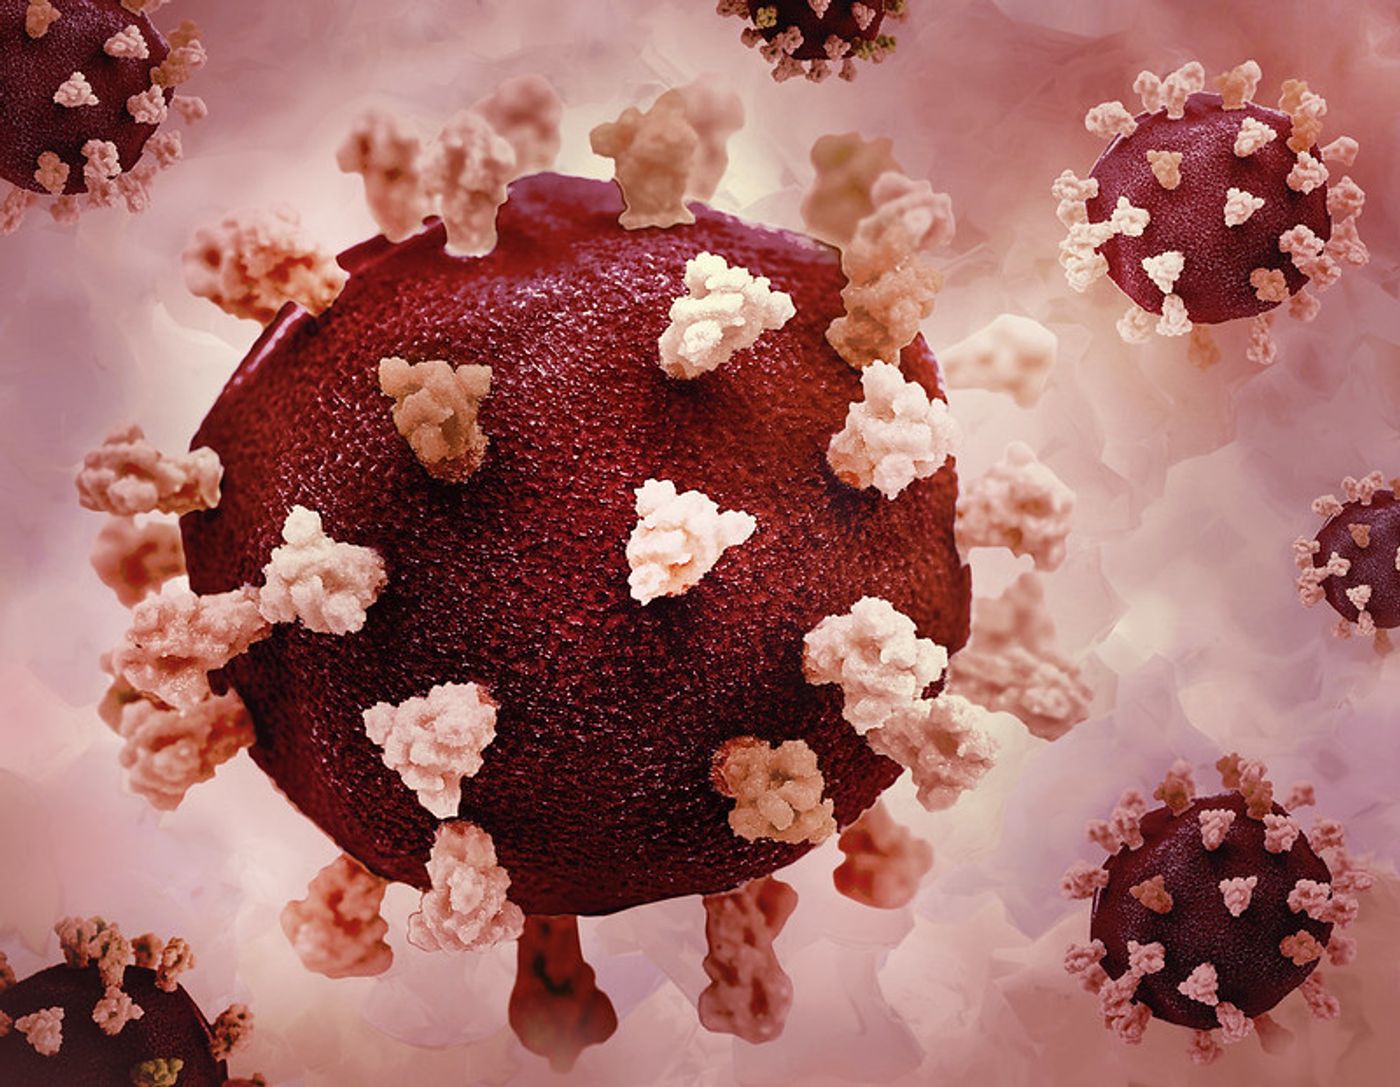 Colorized 3D prints of SARS-CoV-2 virus particles against a creative background. Credit: NIAID